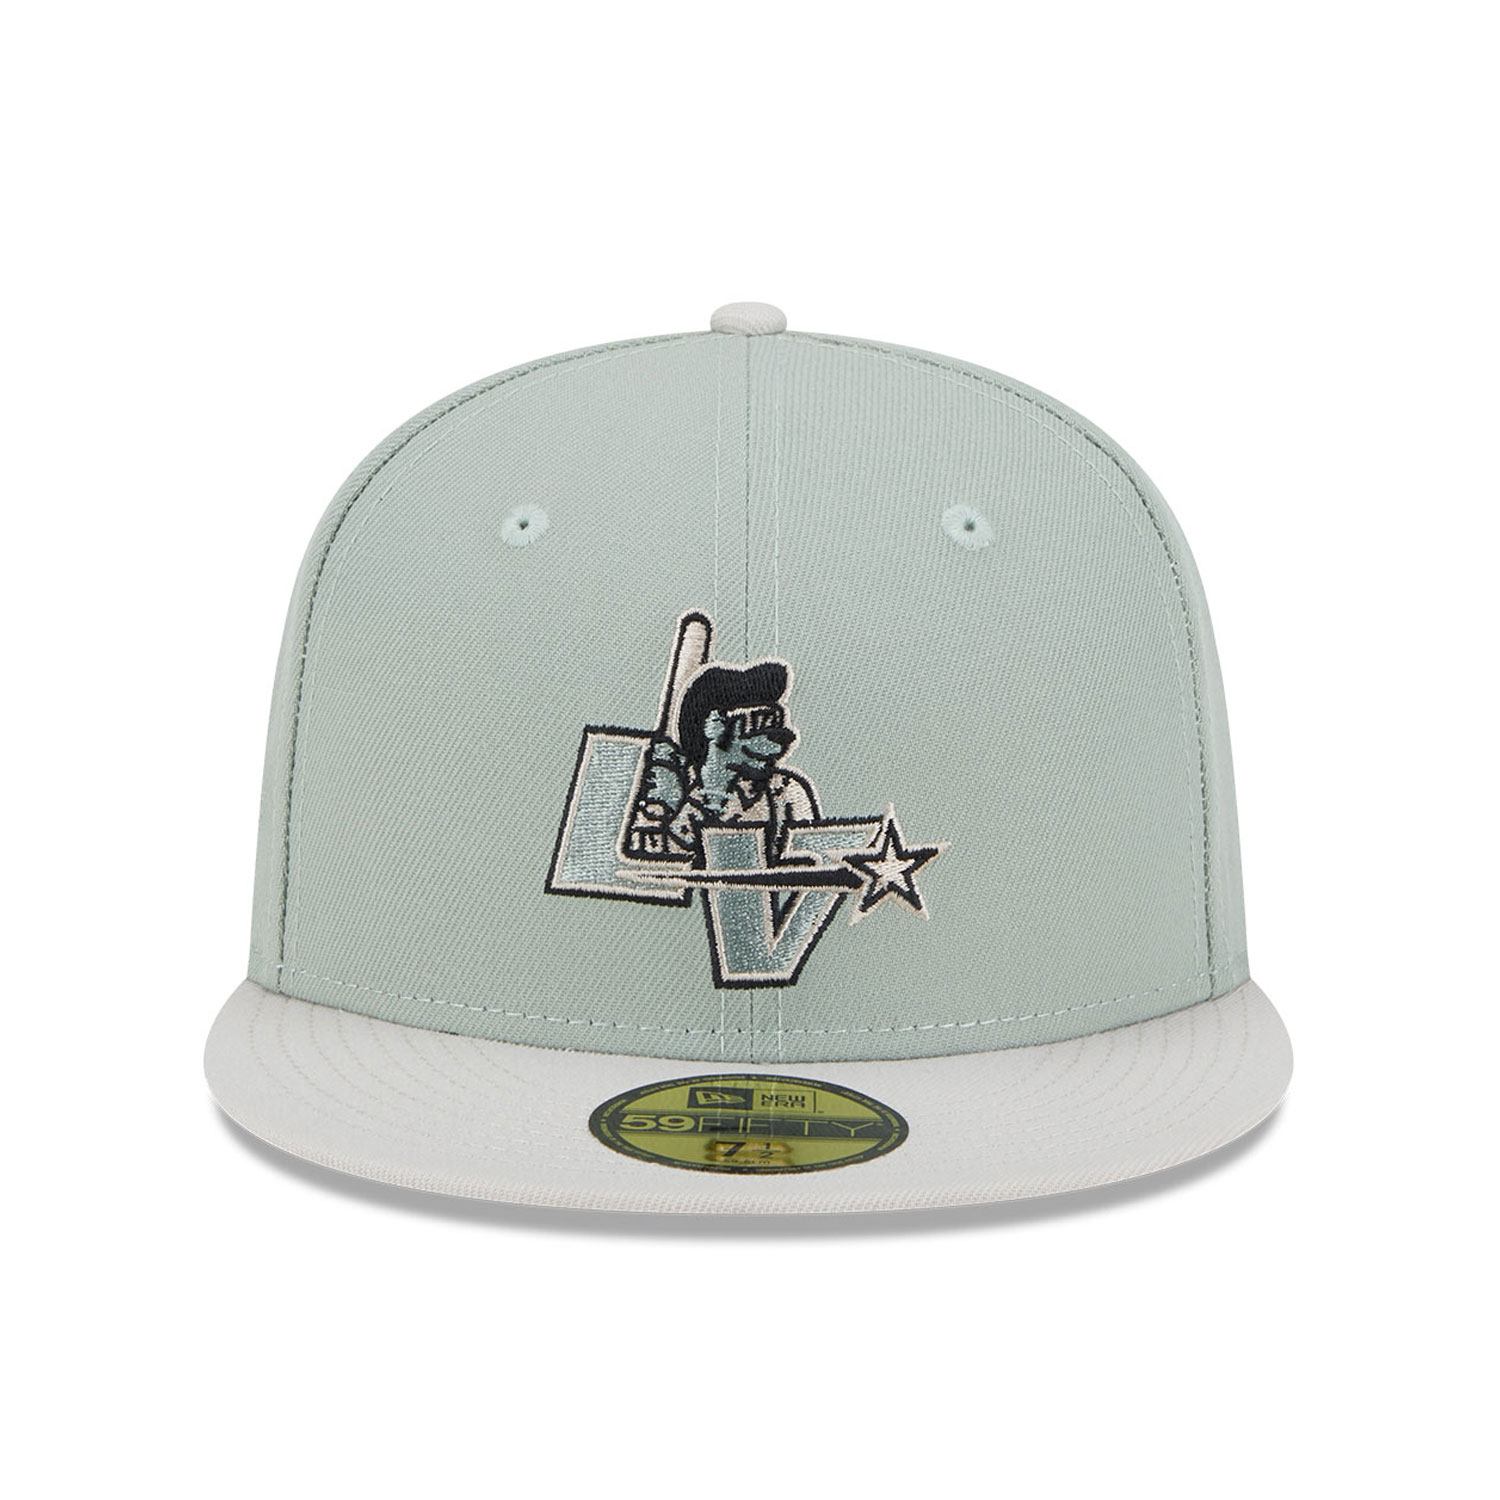 Las Vegas Stars Hometown Roots Green 59FIFTY Fitted Cap